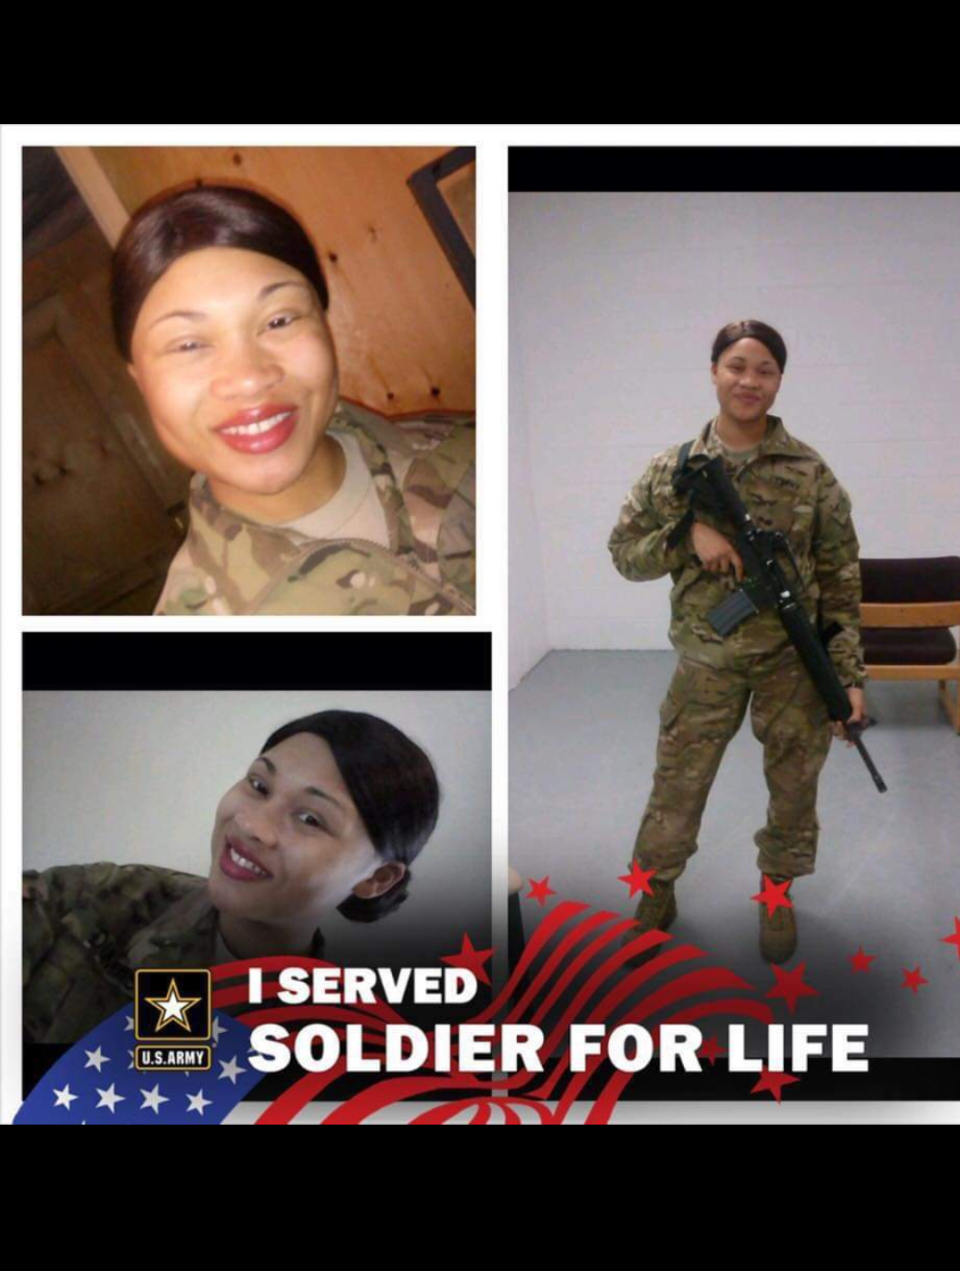 Kiara Anderson is featured in a photo collage, shared on social media. She served in the US Army.